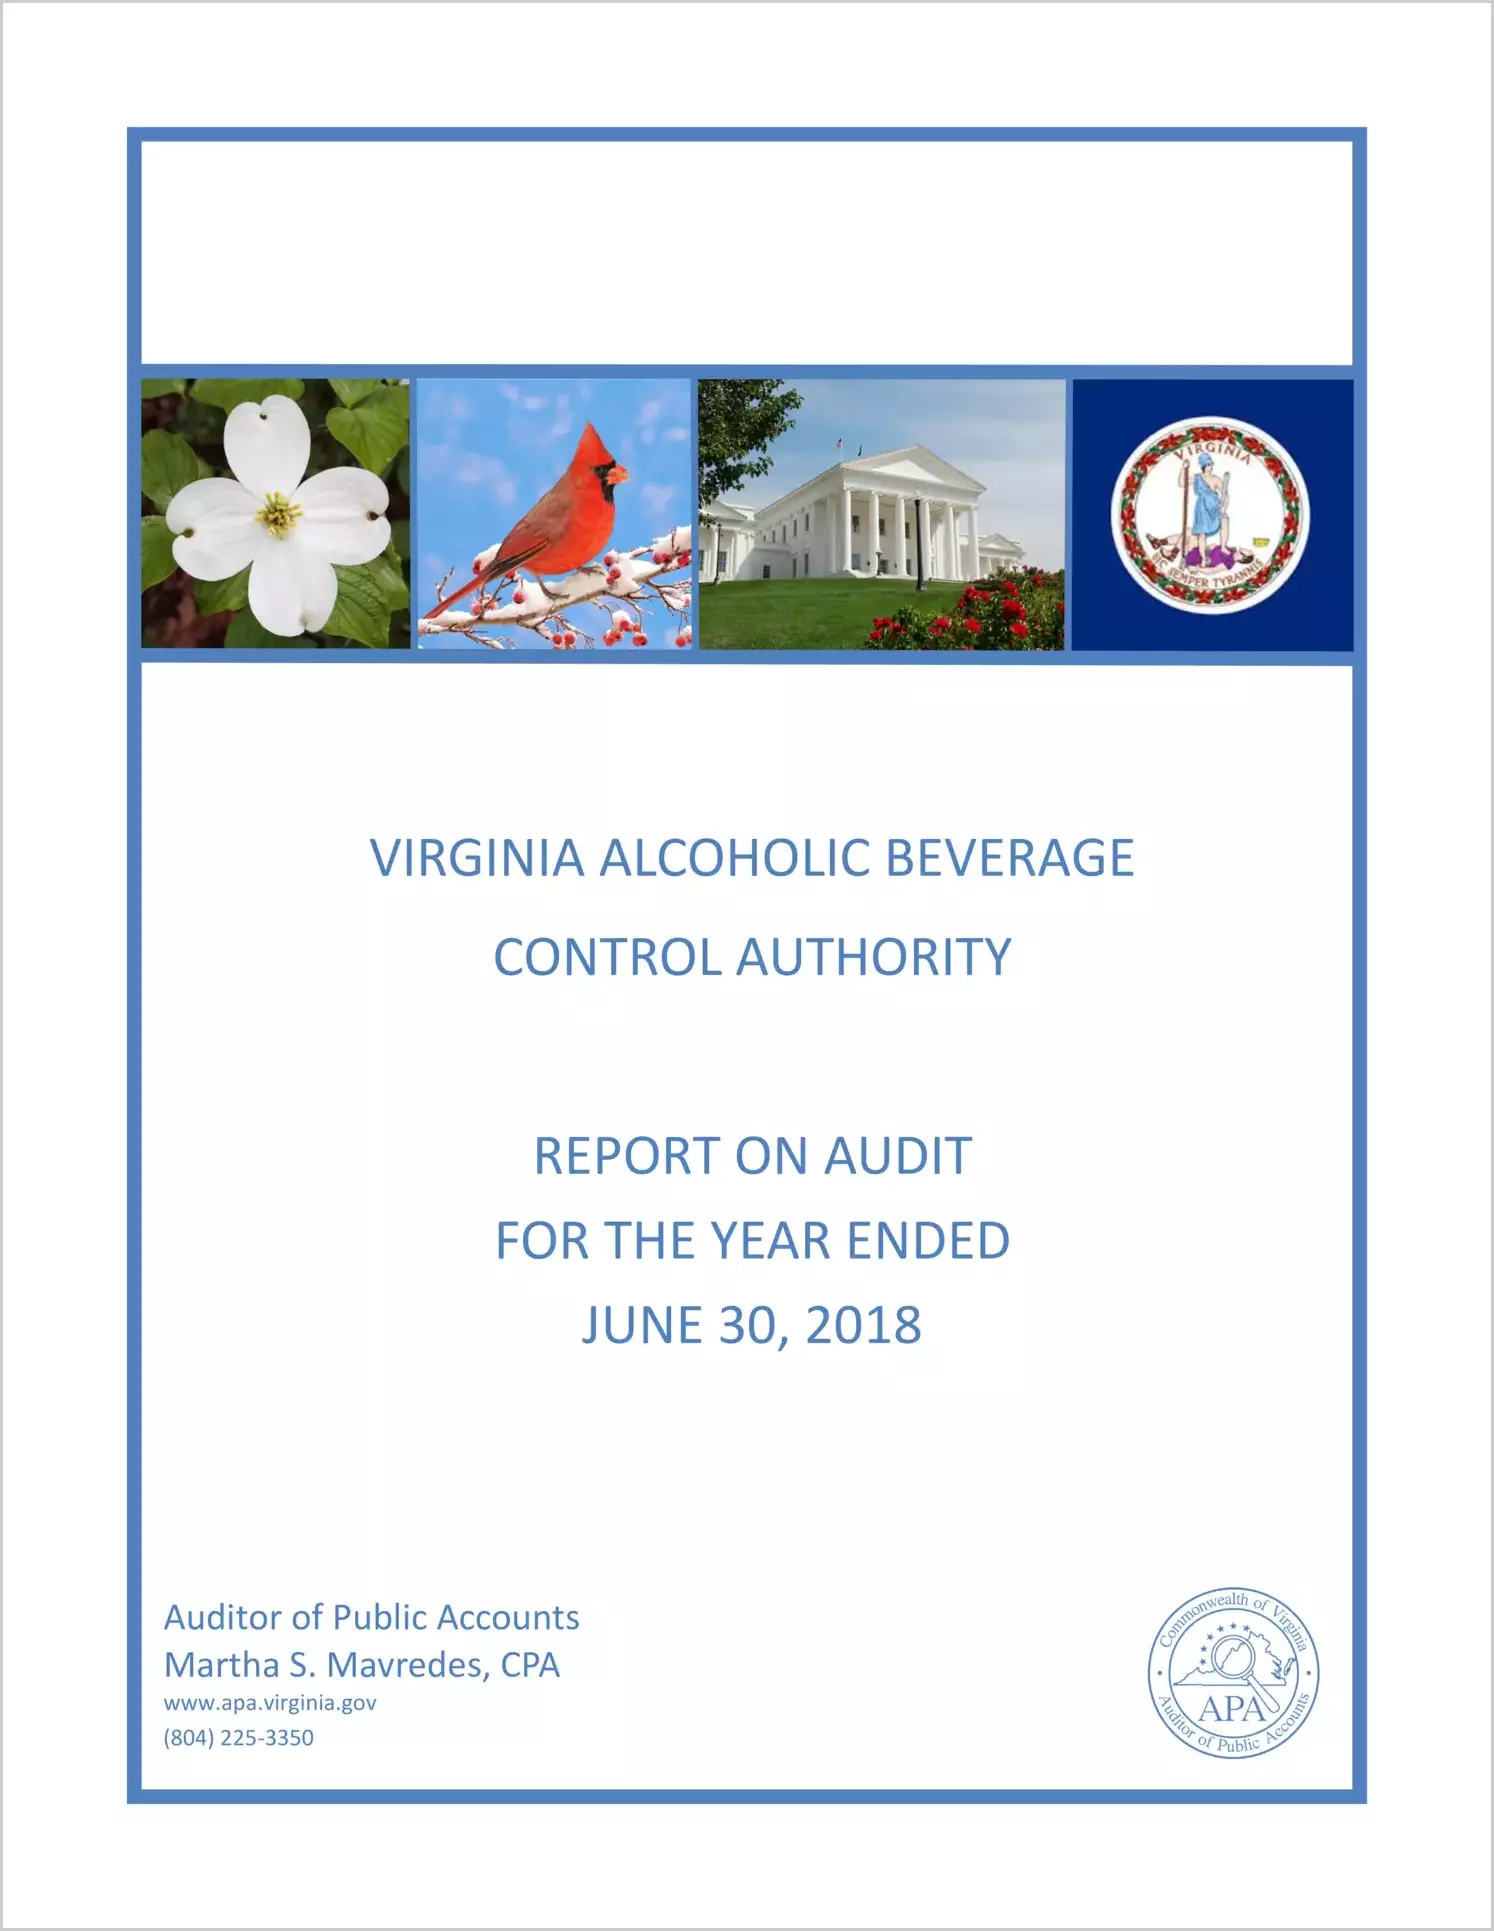 Virginia Alcoholic Beverage Control Authority for the year ended June 30, 2018